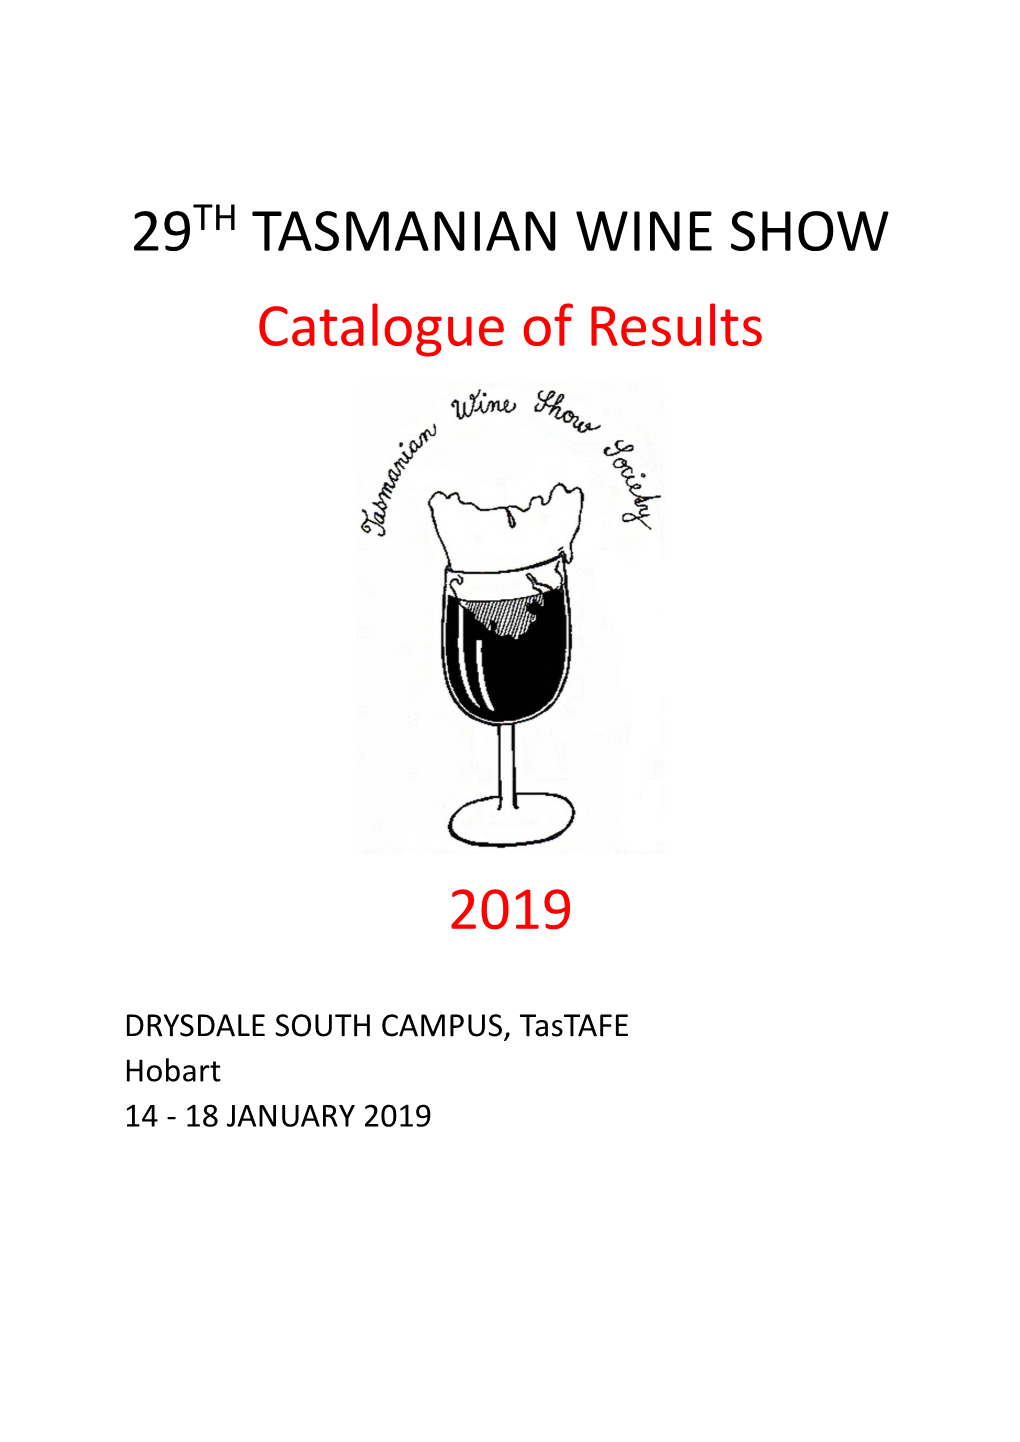 29TH TASMANIAN WINE SHOW Catalogue of Results 2019